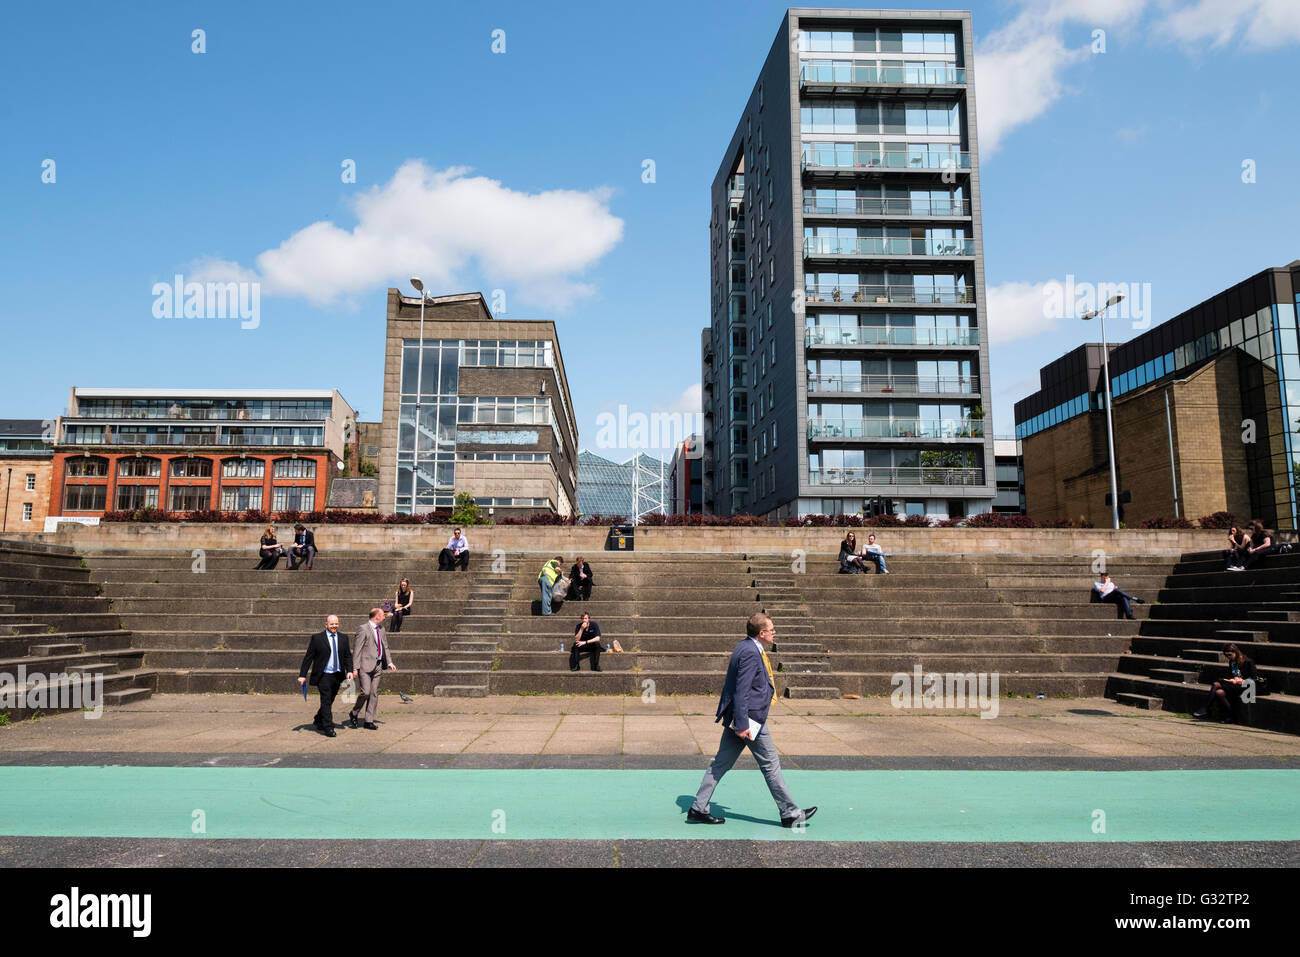 Public amphitheatre on Clyde Street next to River Clyde in central Glasgow United Kingdom Stock Photo